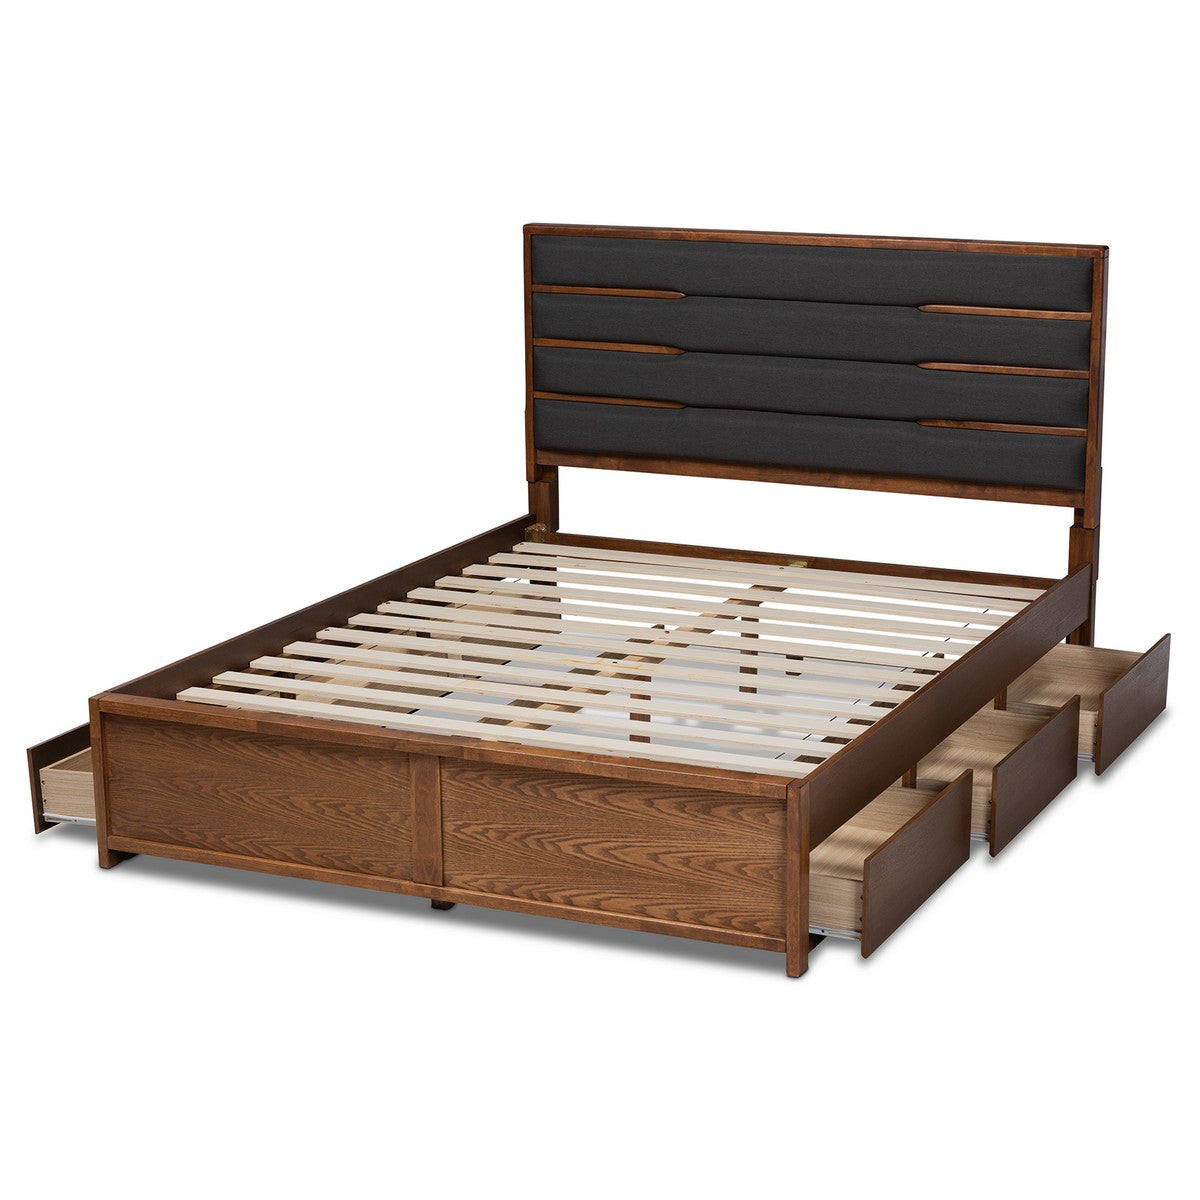 Baxton Studio Elin Modern and Contemporary Dark Grey Fabric Upholstered Walnut Finished Wood King Size Platform Storage Bed with Six Drawers